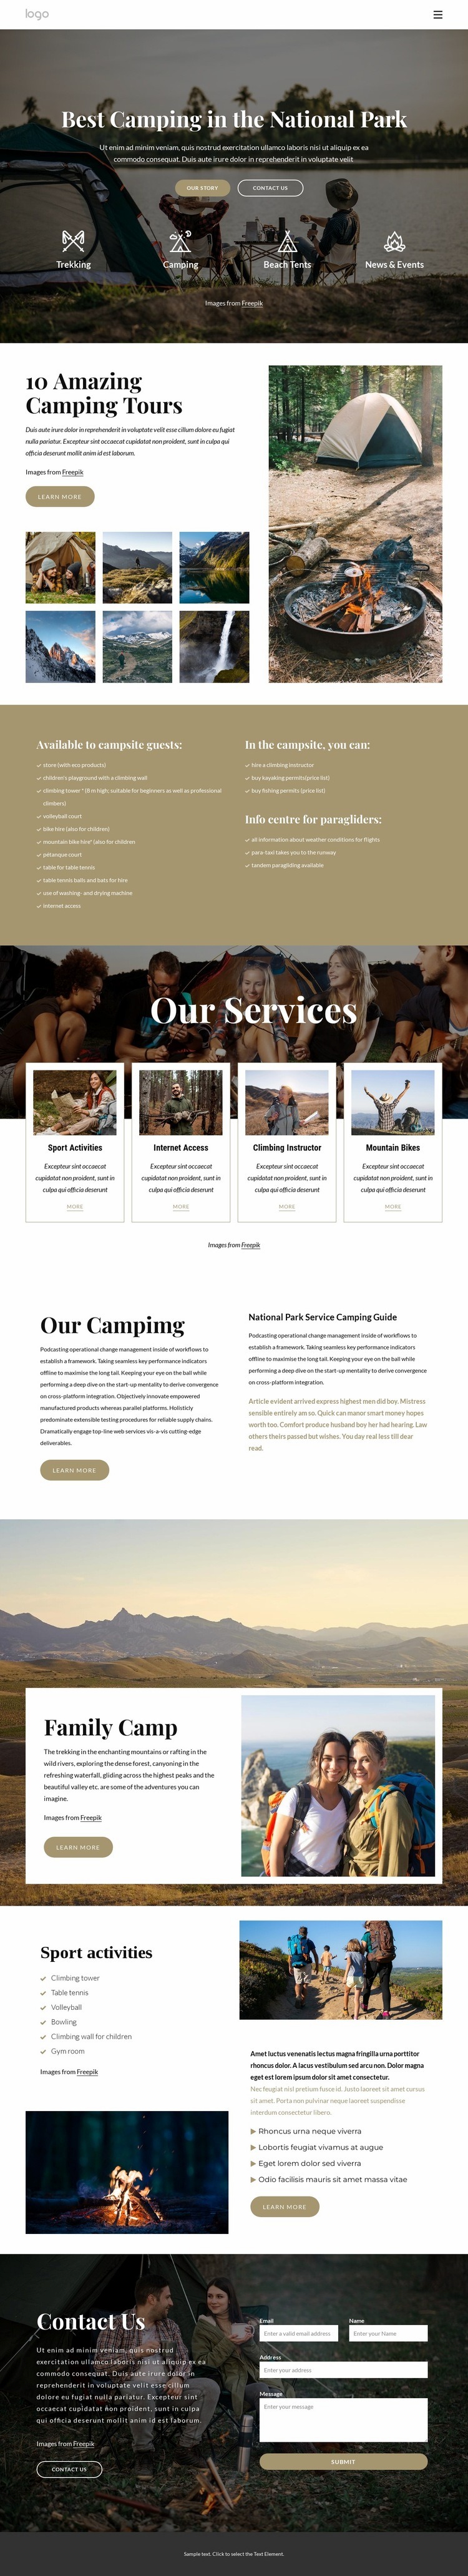 Camping in National Park Web Page Design